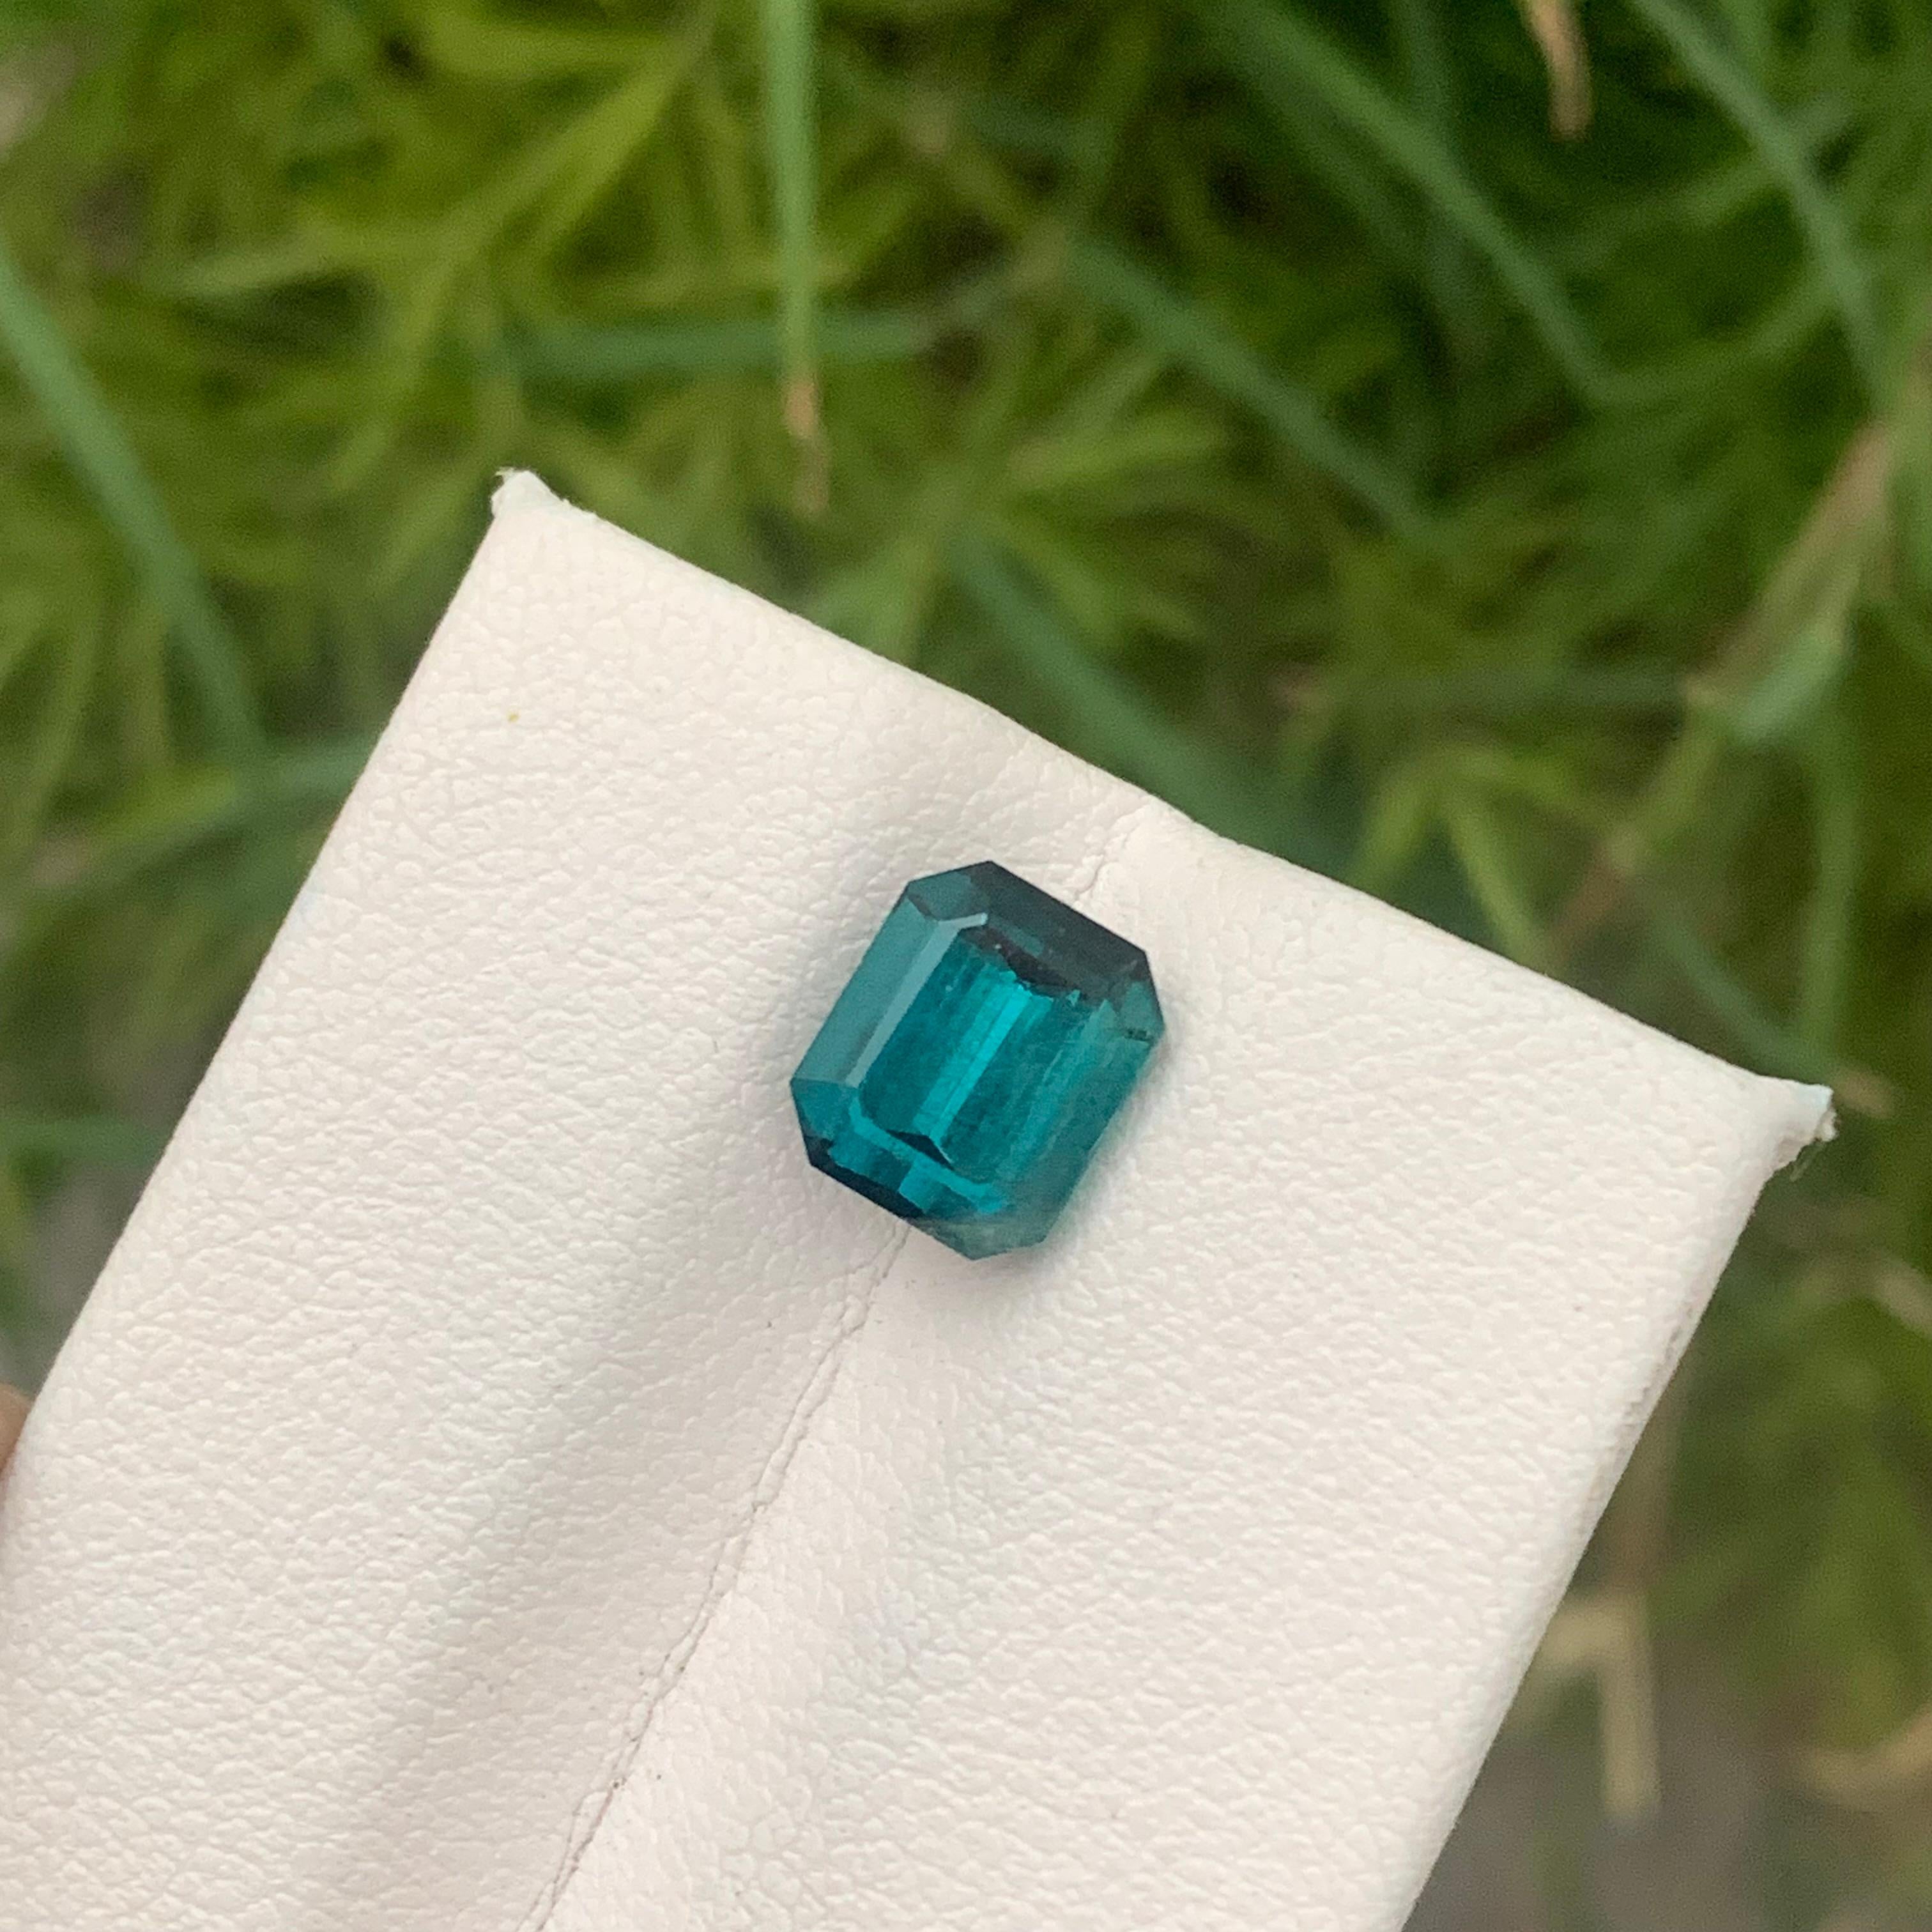 2.75 Carat Included Natural Loose Indicolite Tourmaline Emerald Cut Ring Gem For Sale 7